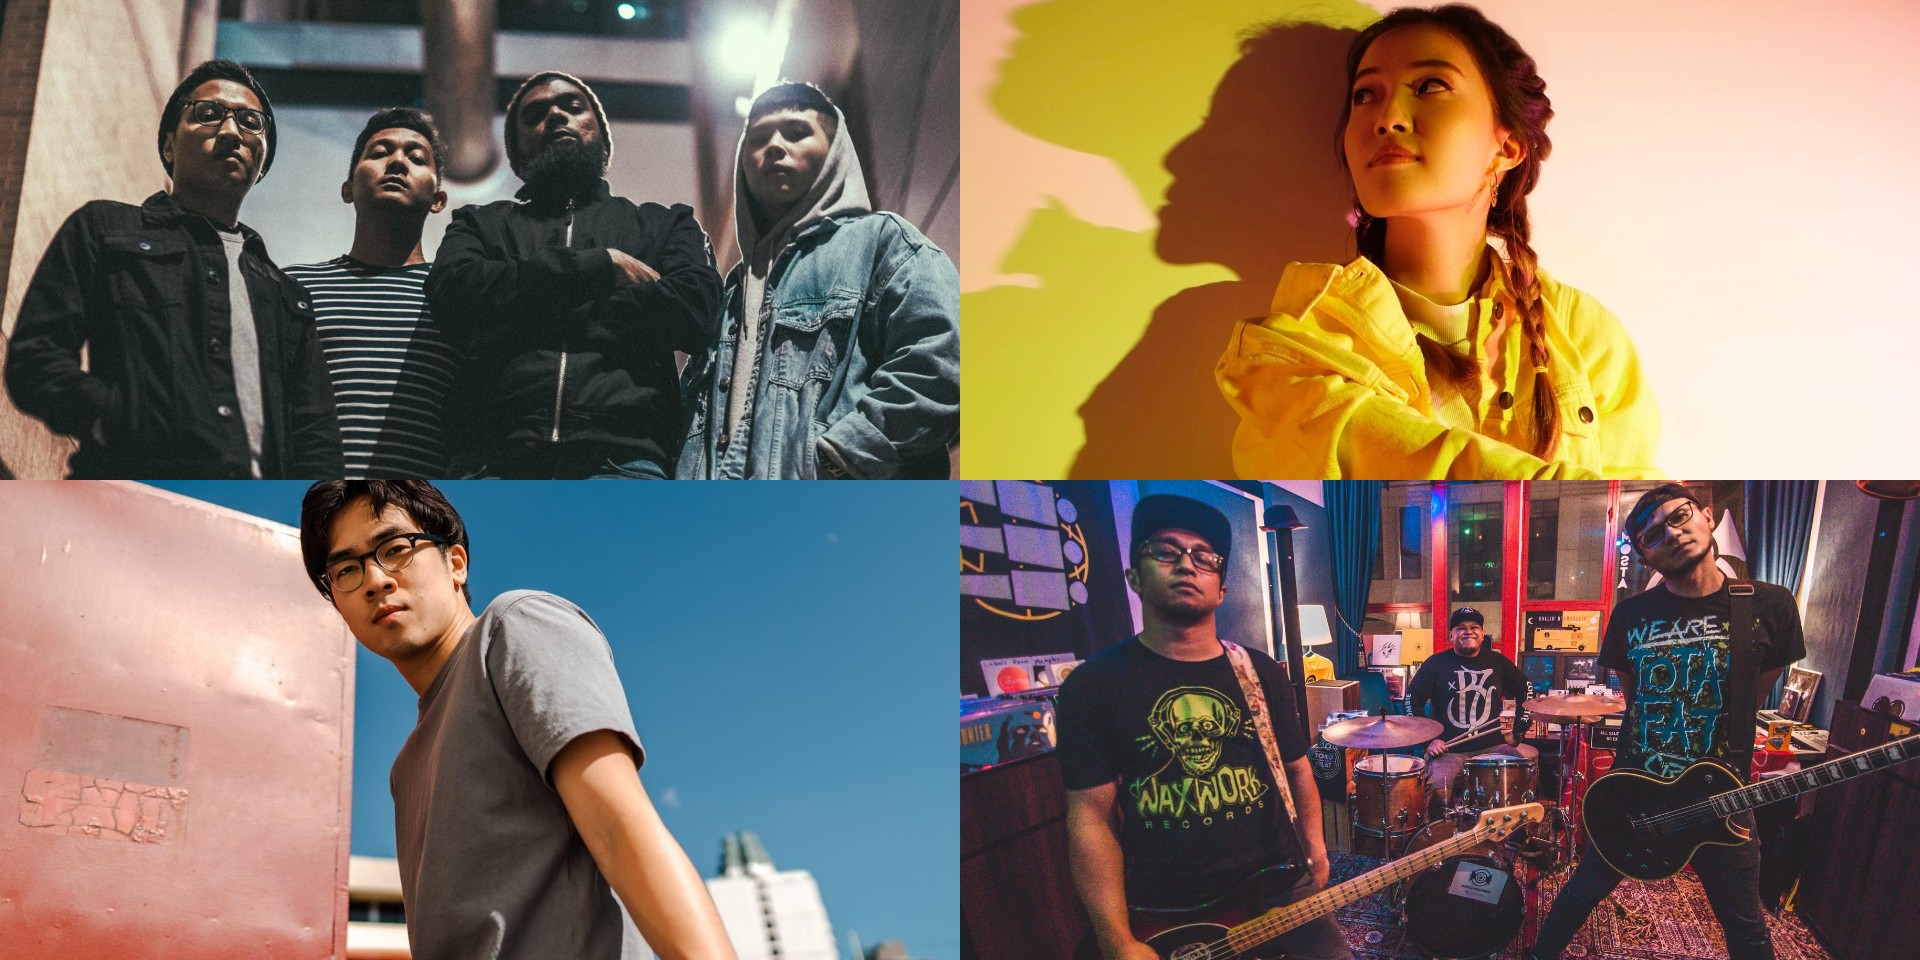 Baybeats 2020 goes digital with special online edition featuring Charlie Lim, Iman's League, Annette Lee, and more